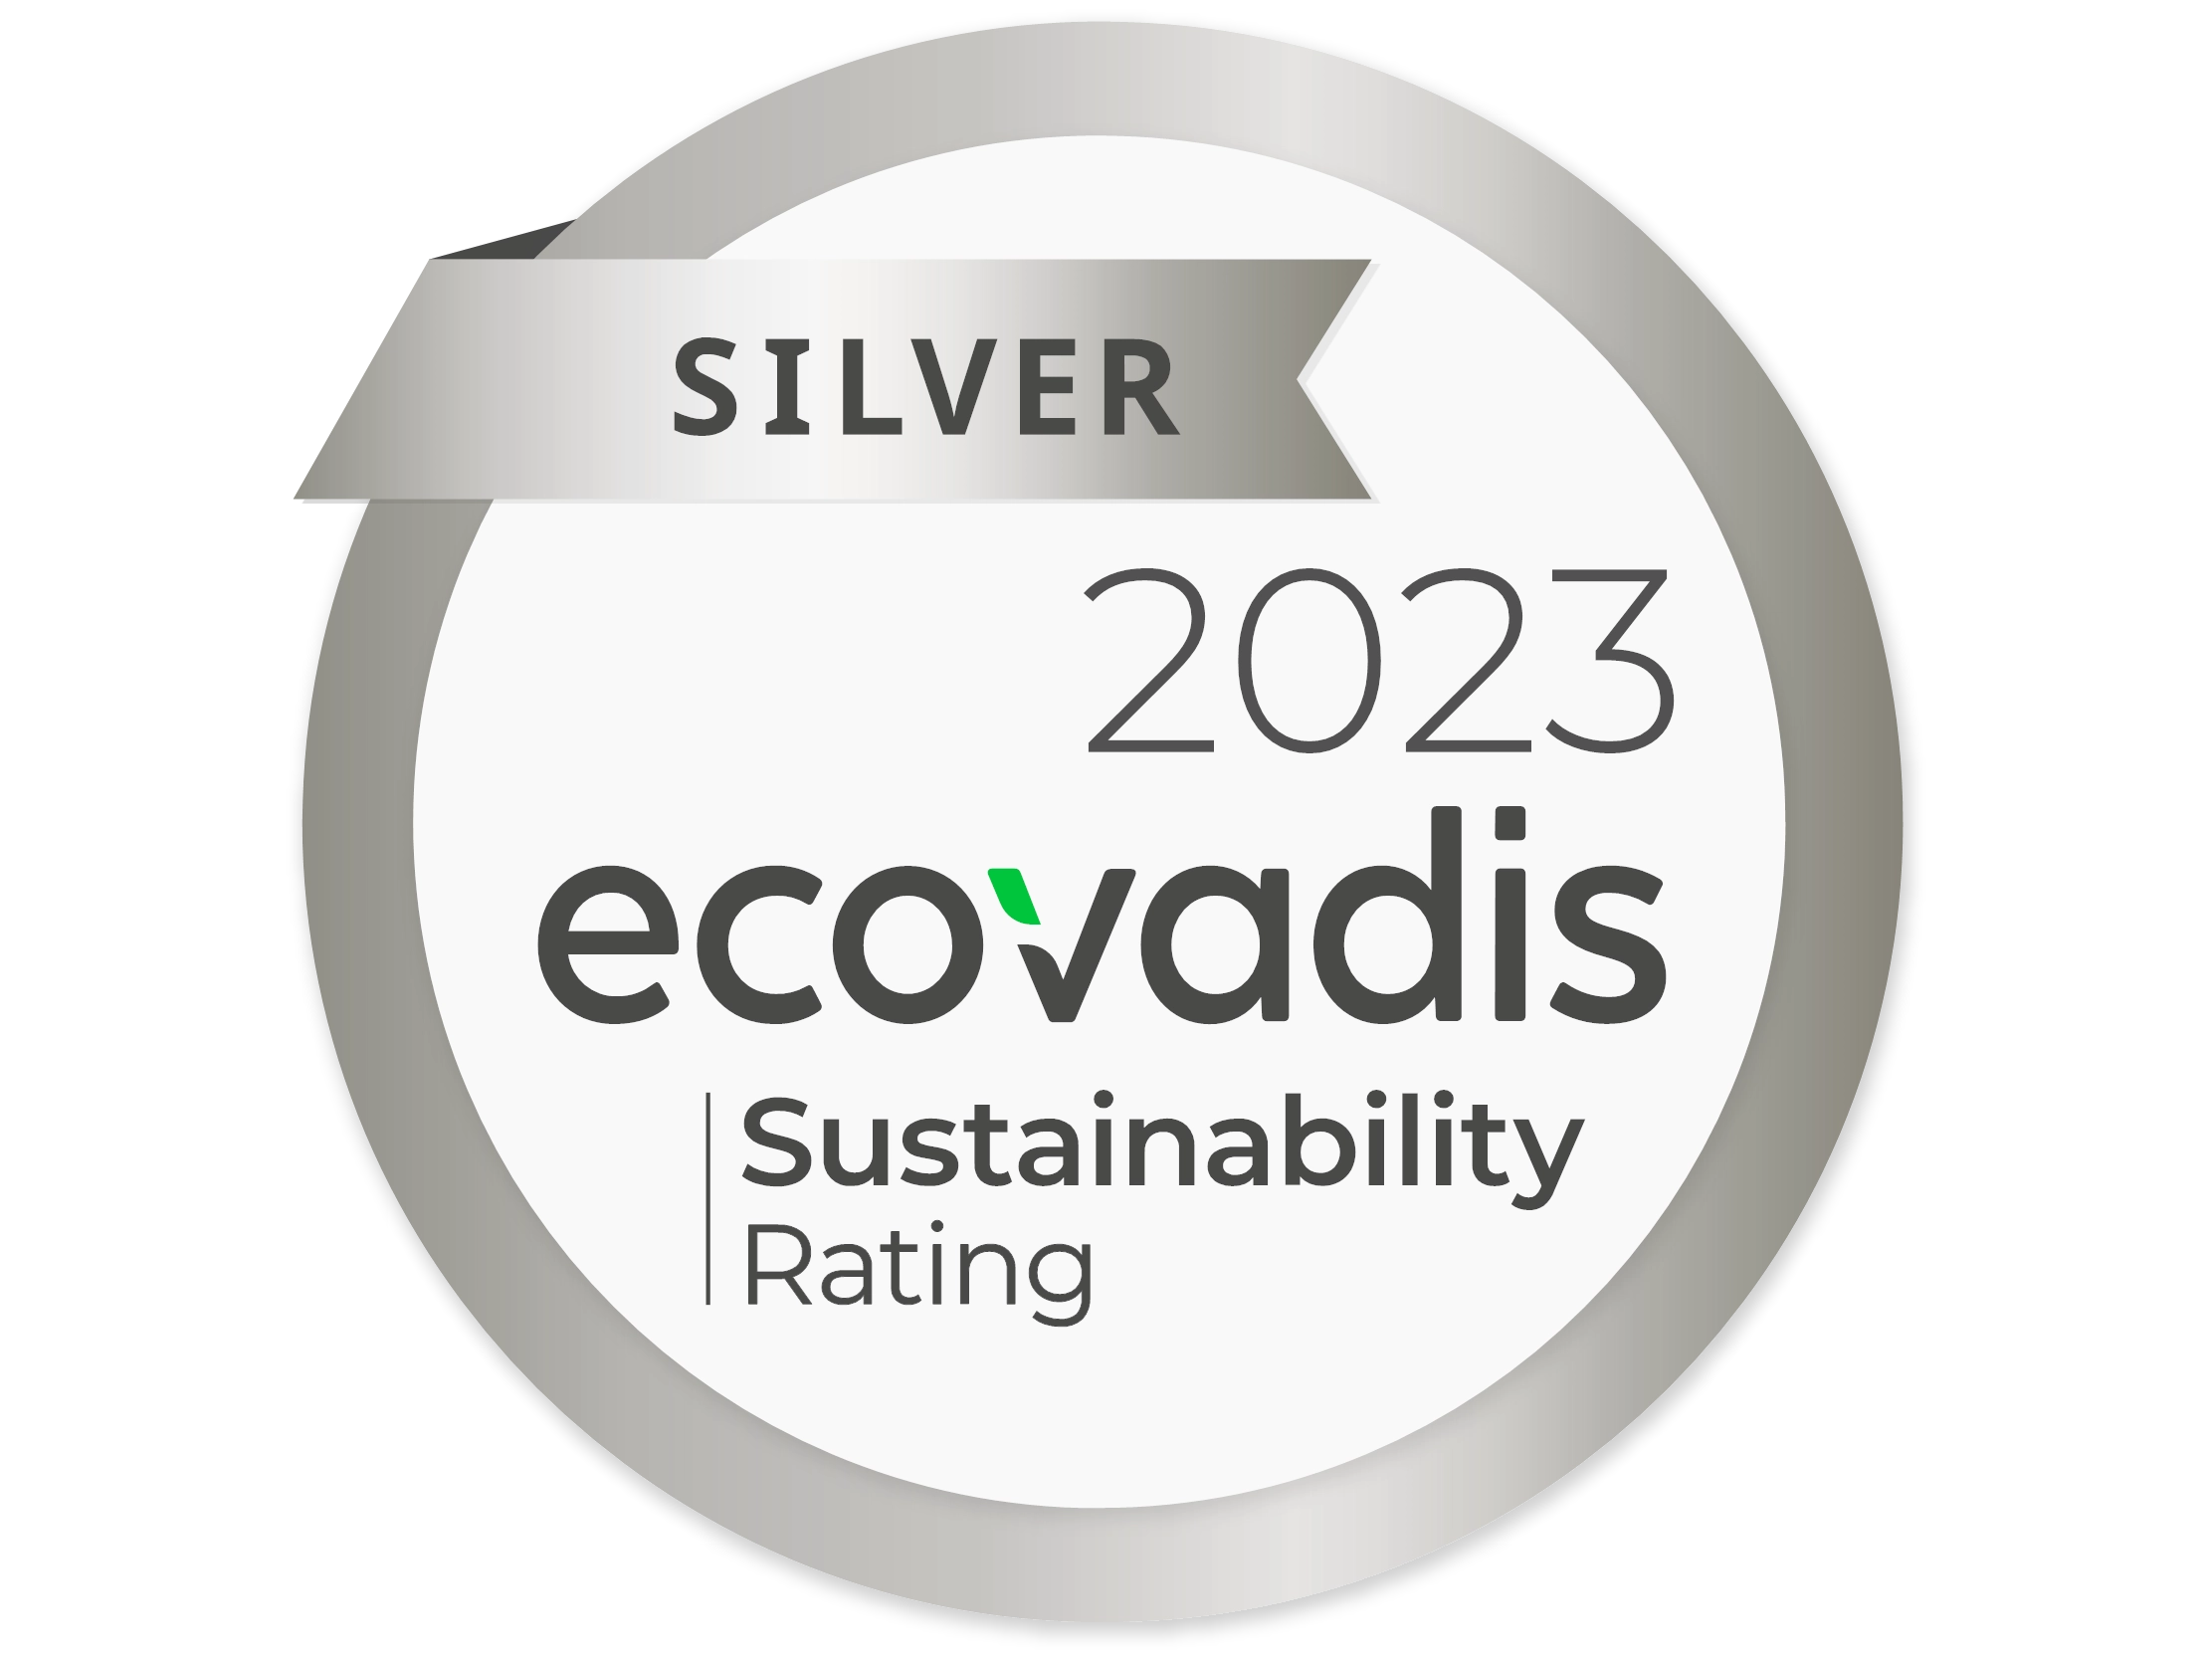 Silver award symbol for Ecovadis rating in 2023